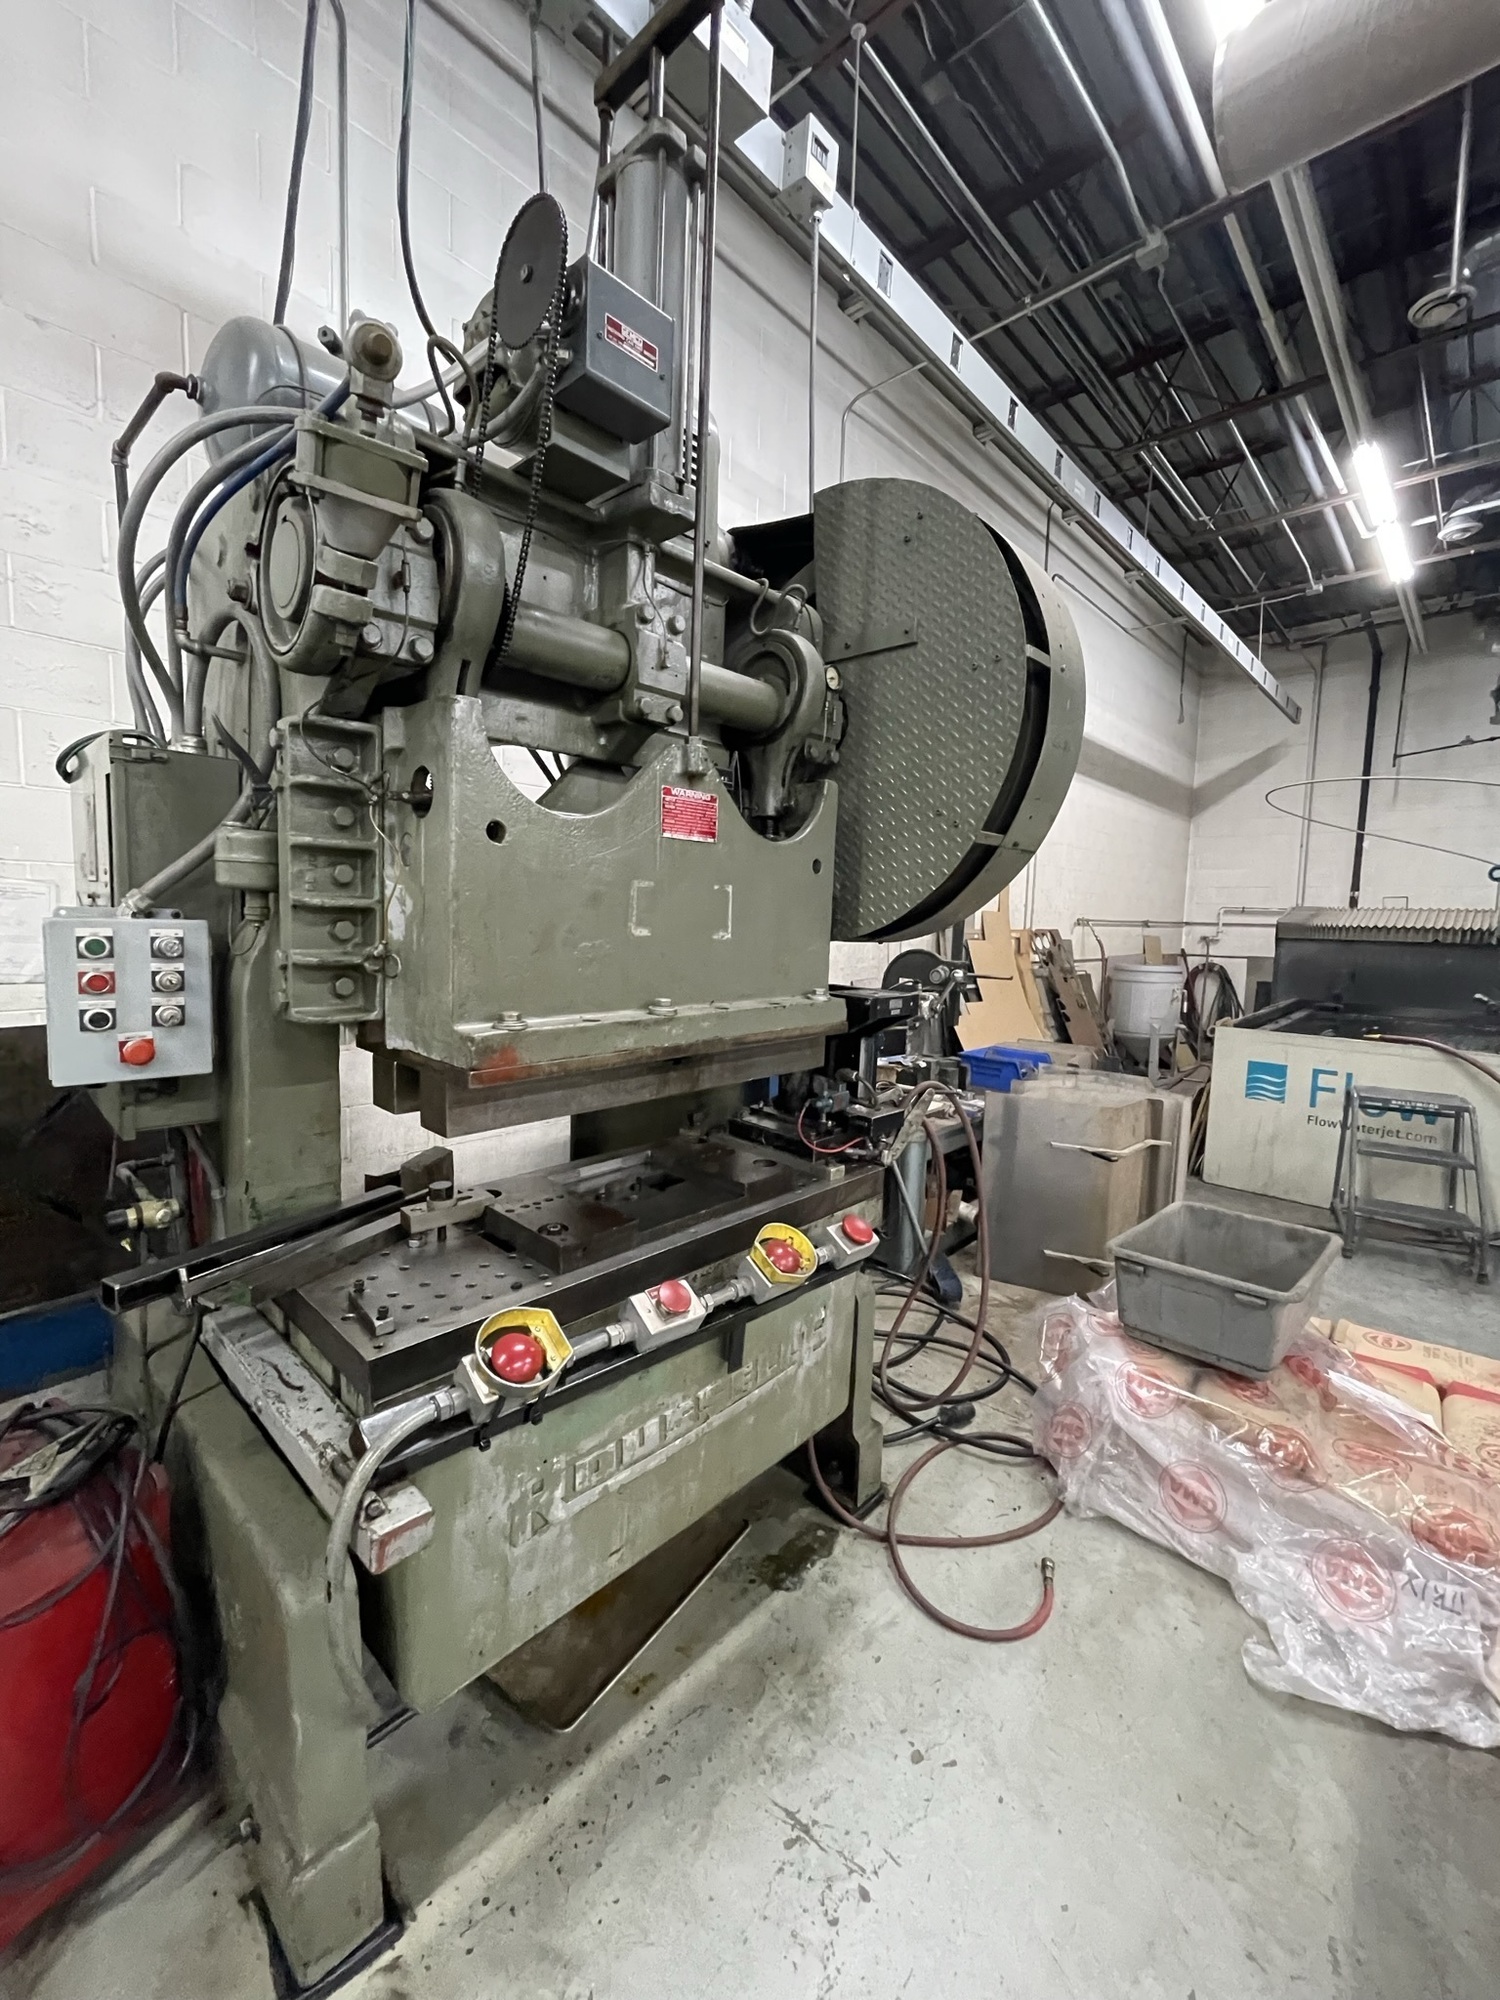 1970 ROUSSELLE 6B-48 PRESSES, GAP FRAME (OBS) | Strand Industrial Machinery Co.